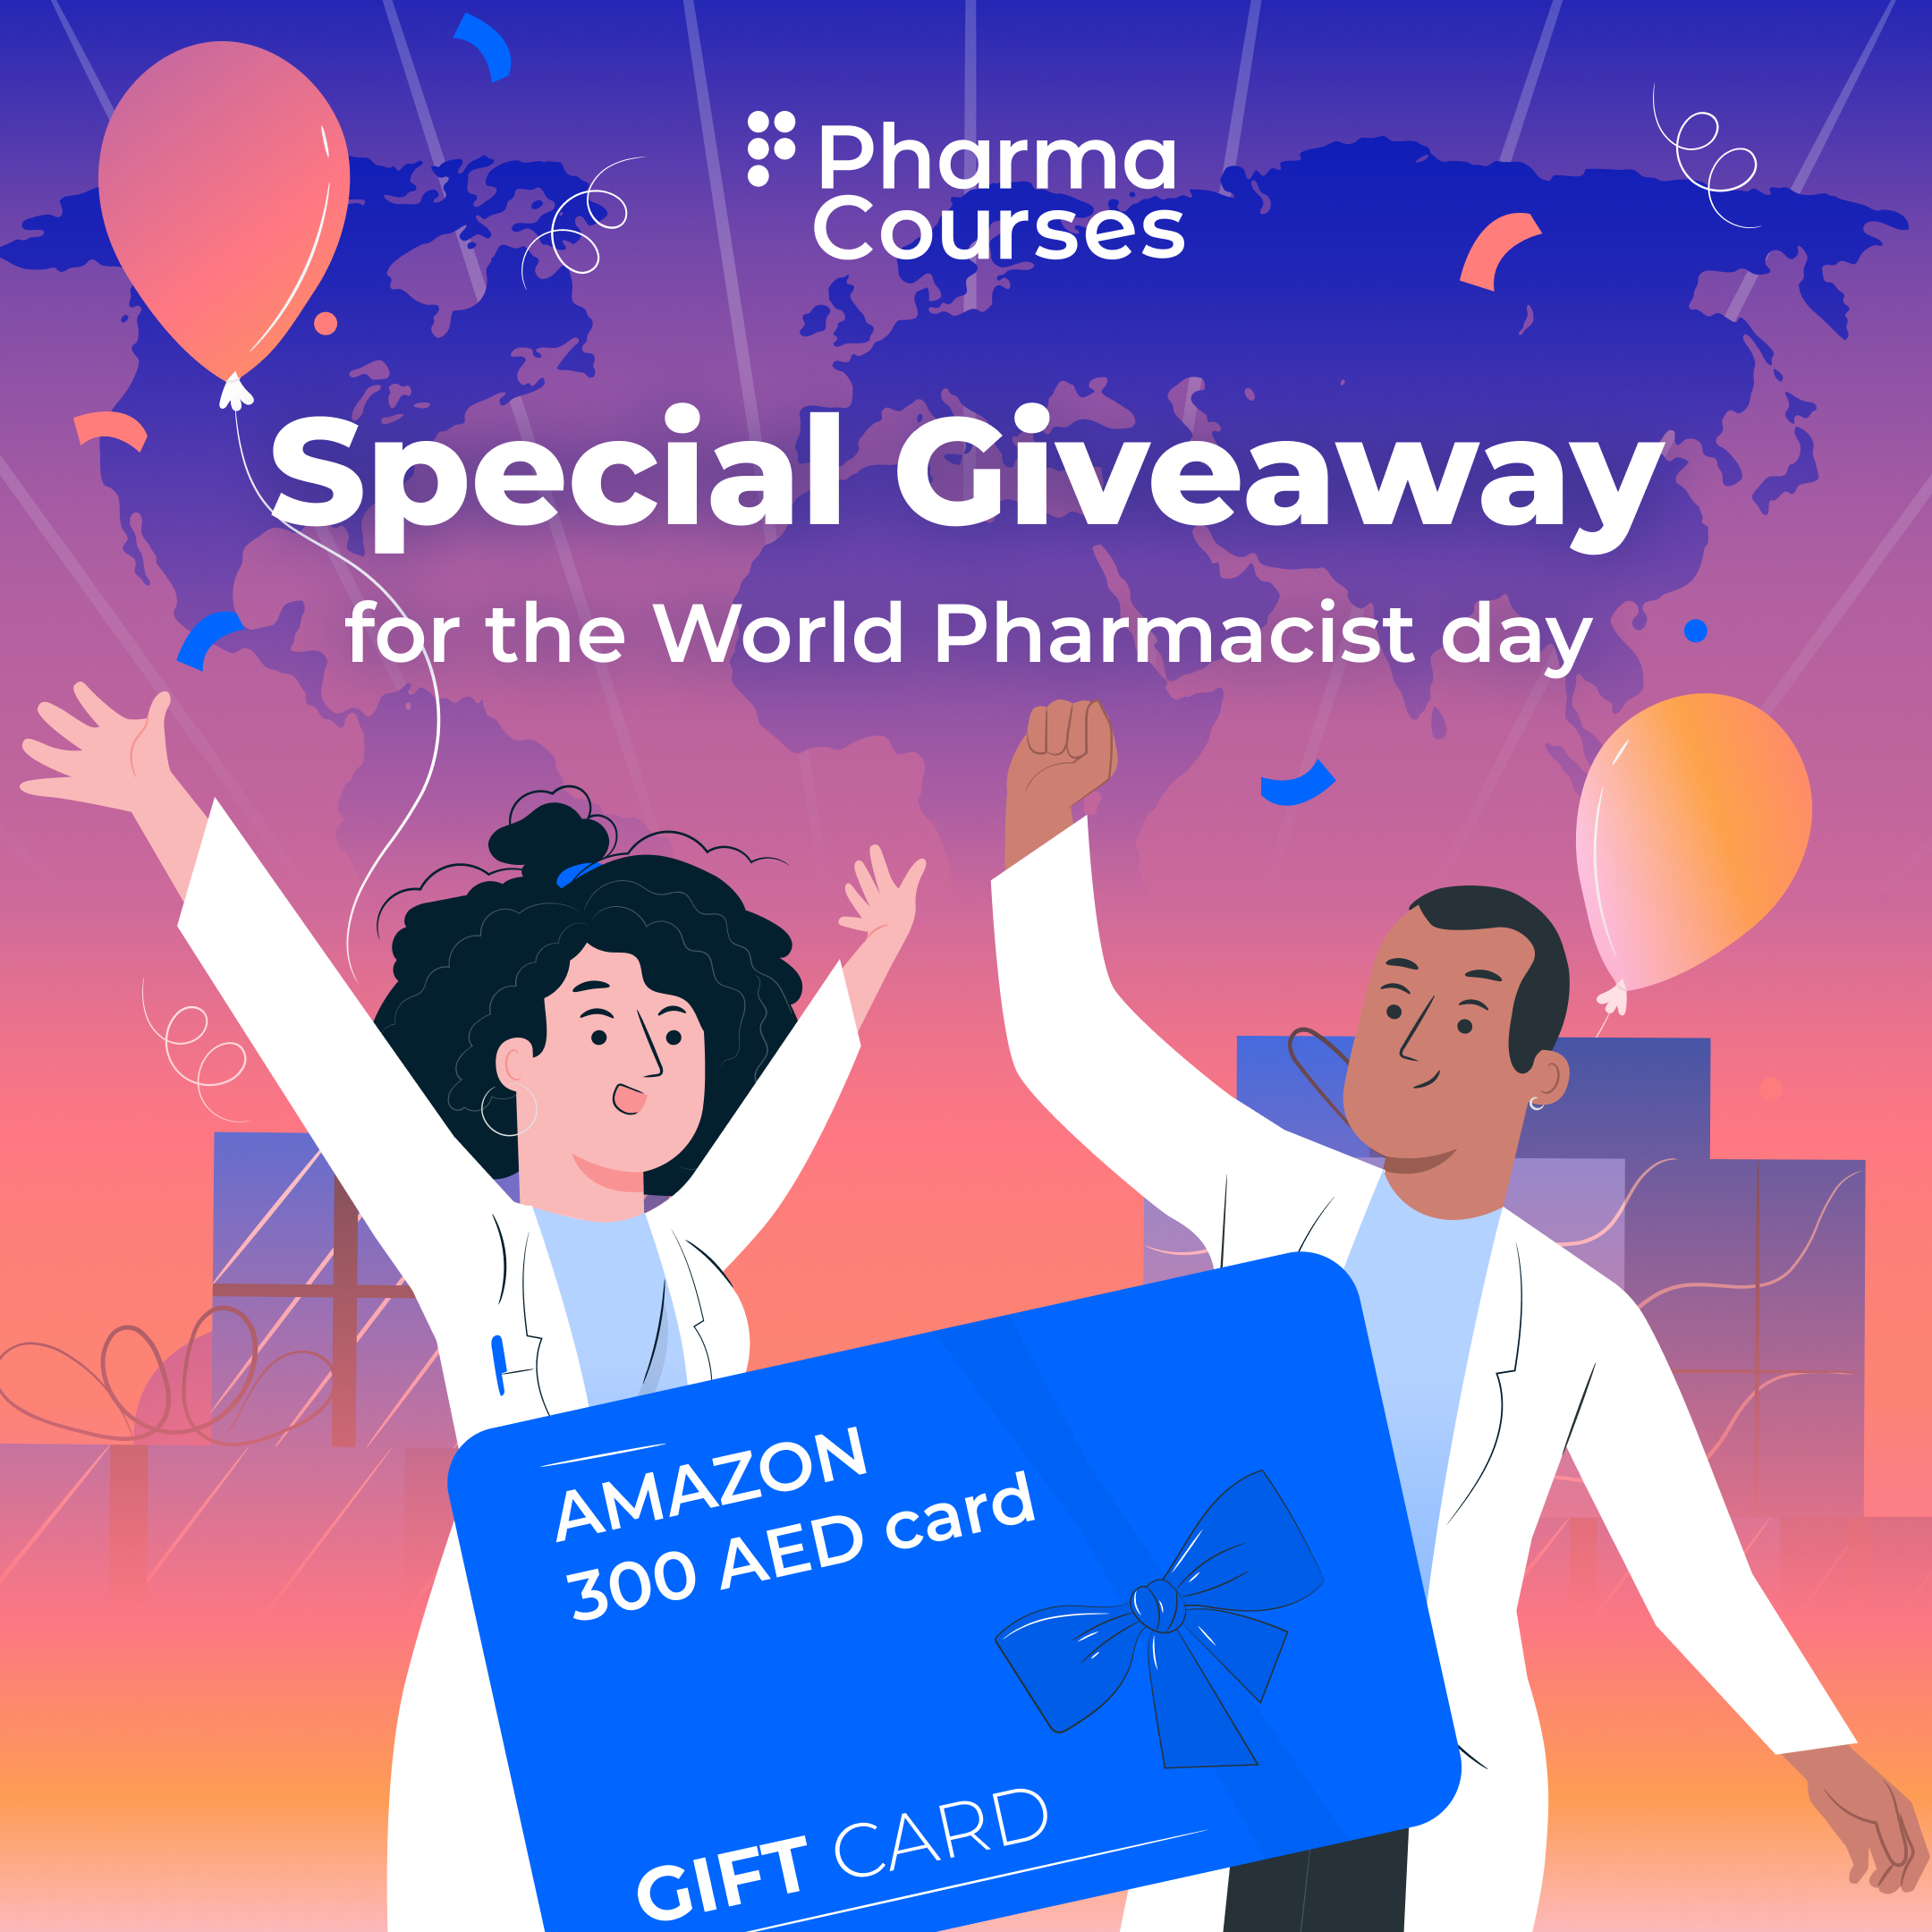 Special Giveaway for the World Pharmacist day!